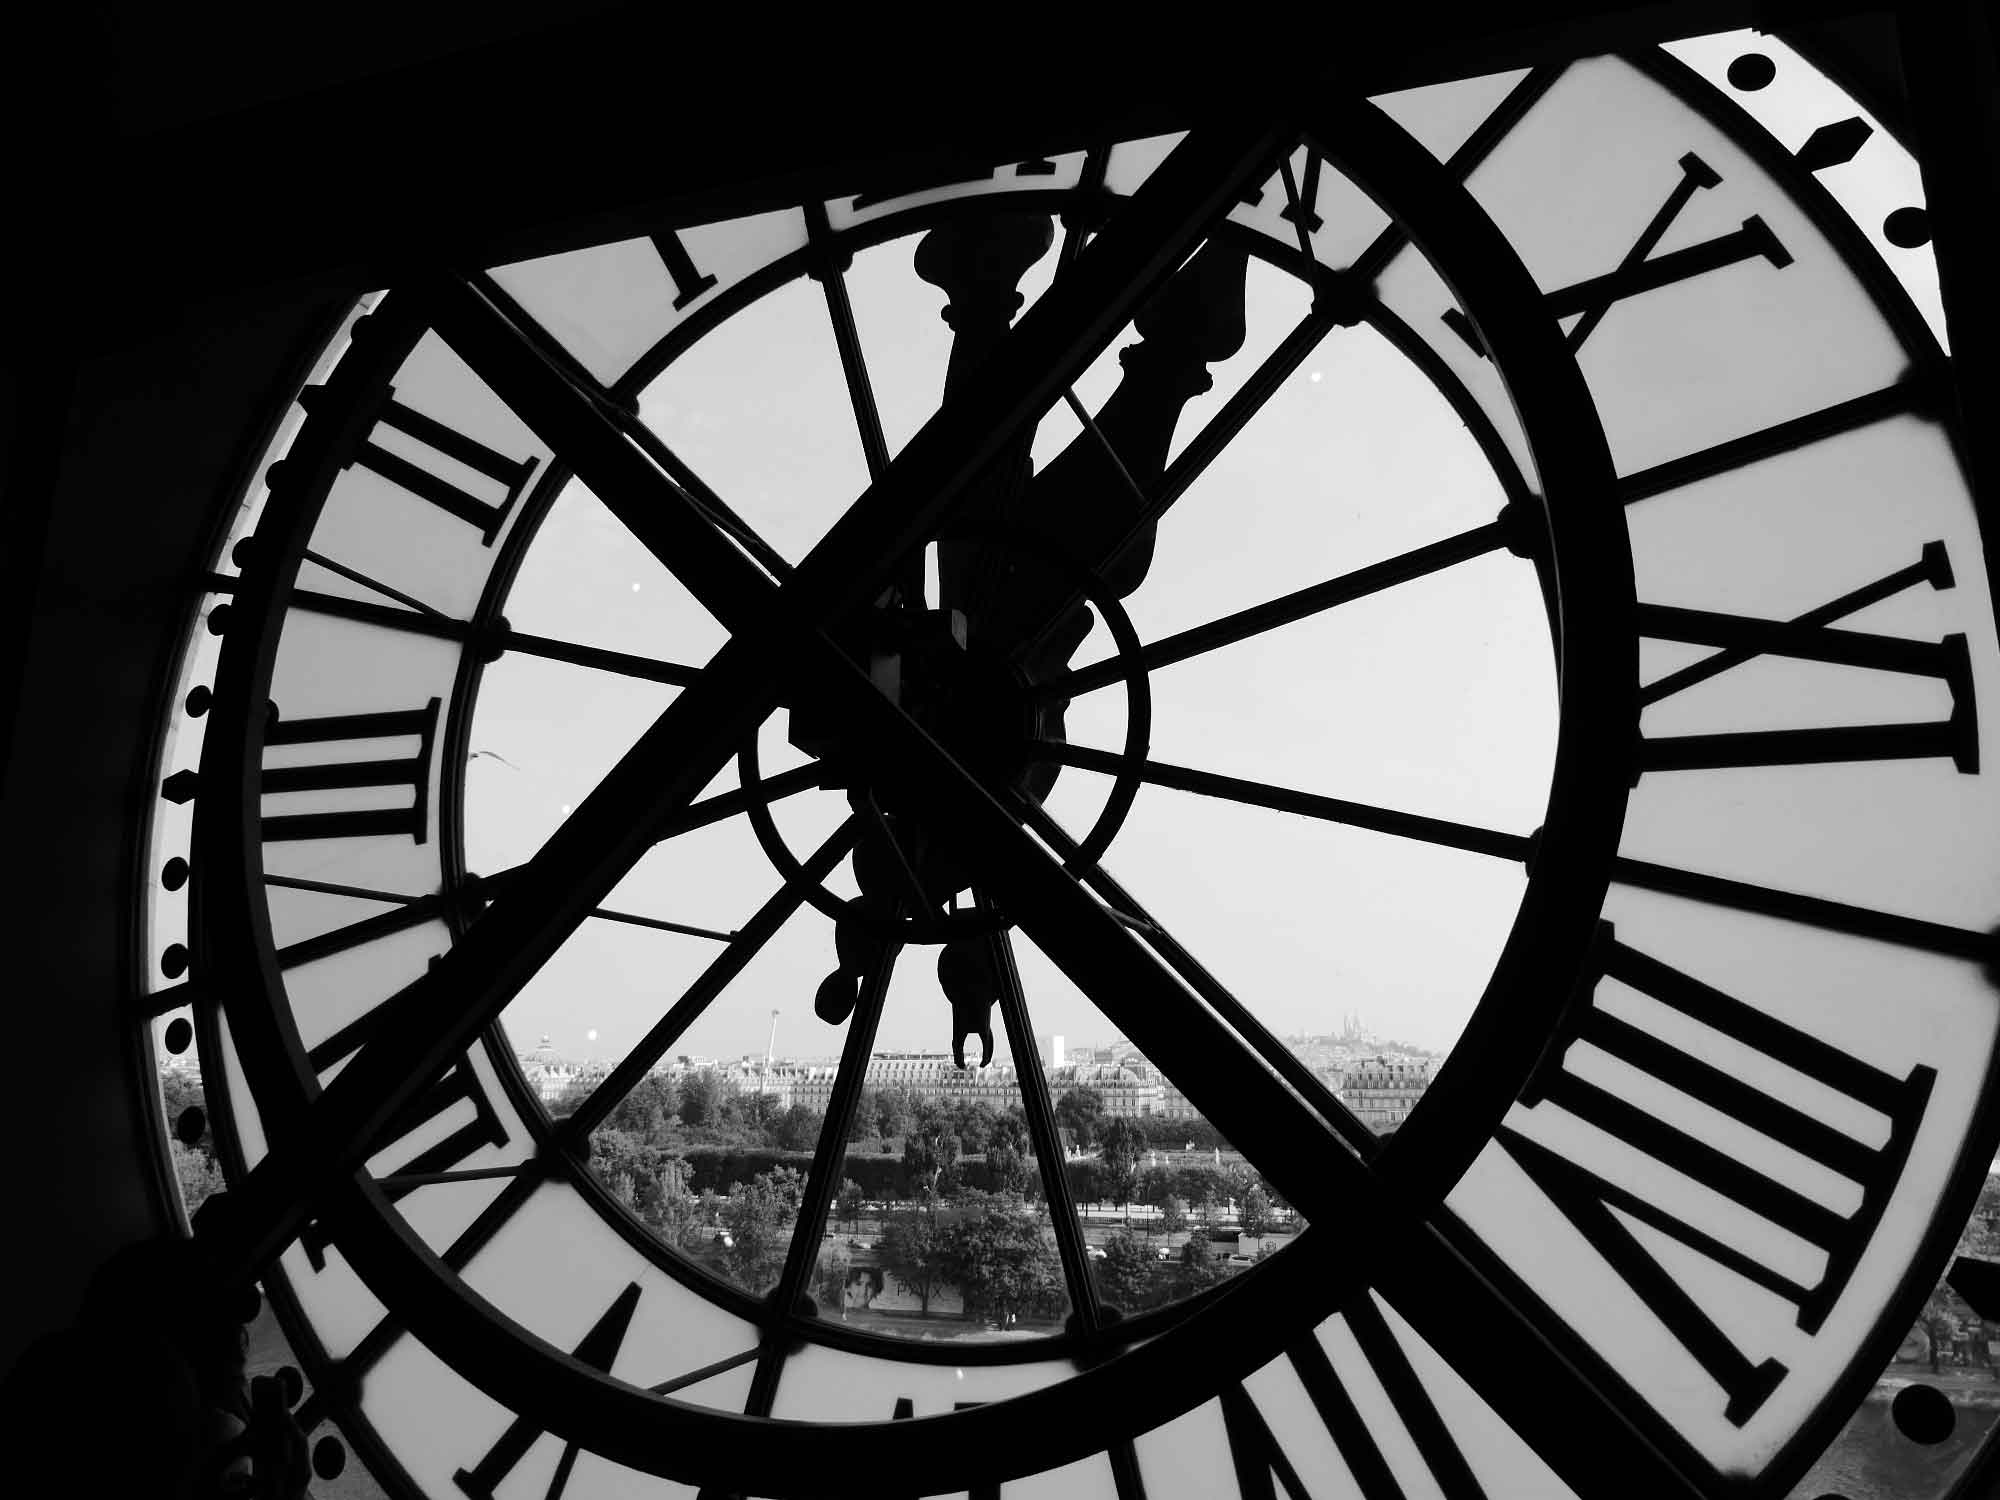 Black and white photo from inside clock tower through clock face